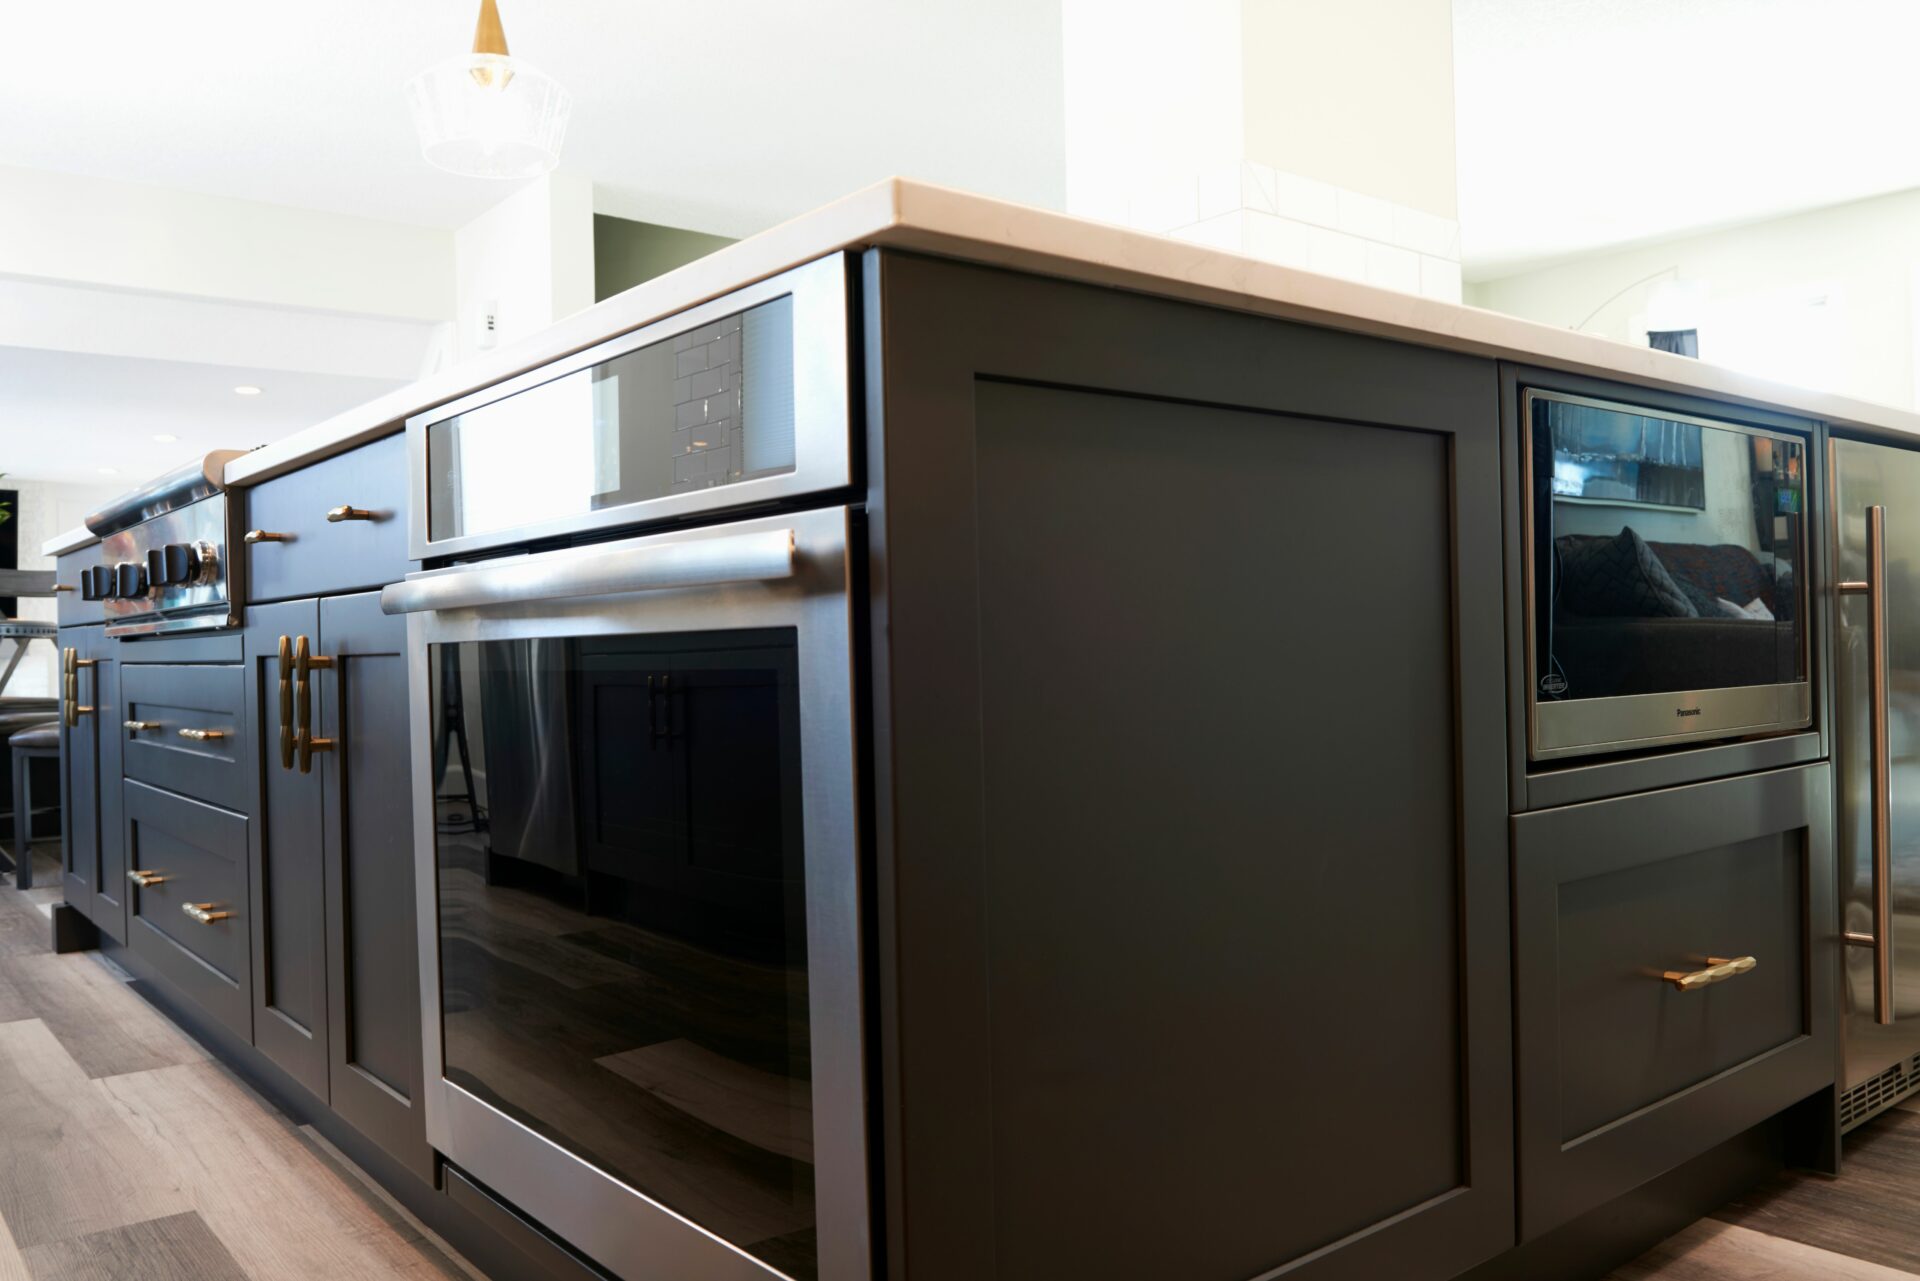 A kitchen with an oven and microwave in it